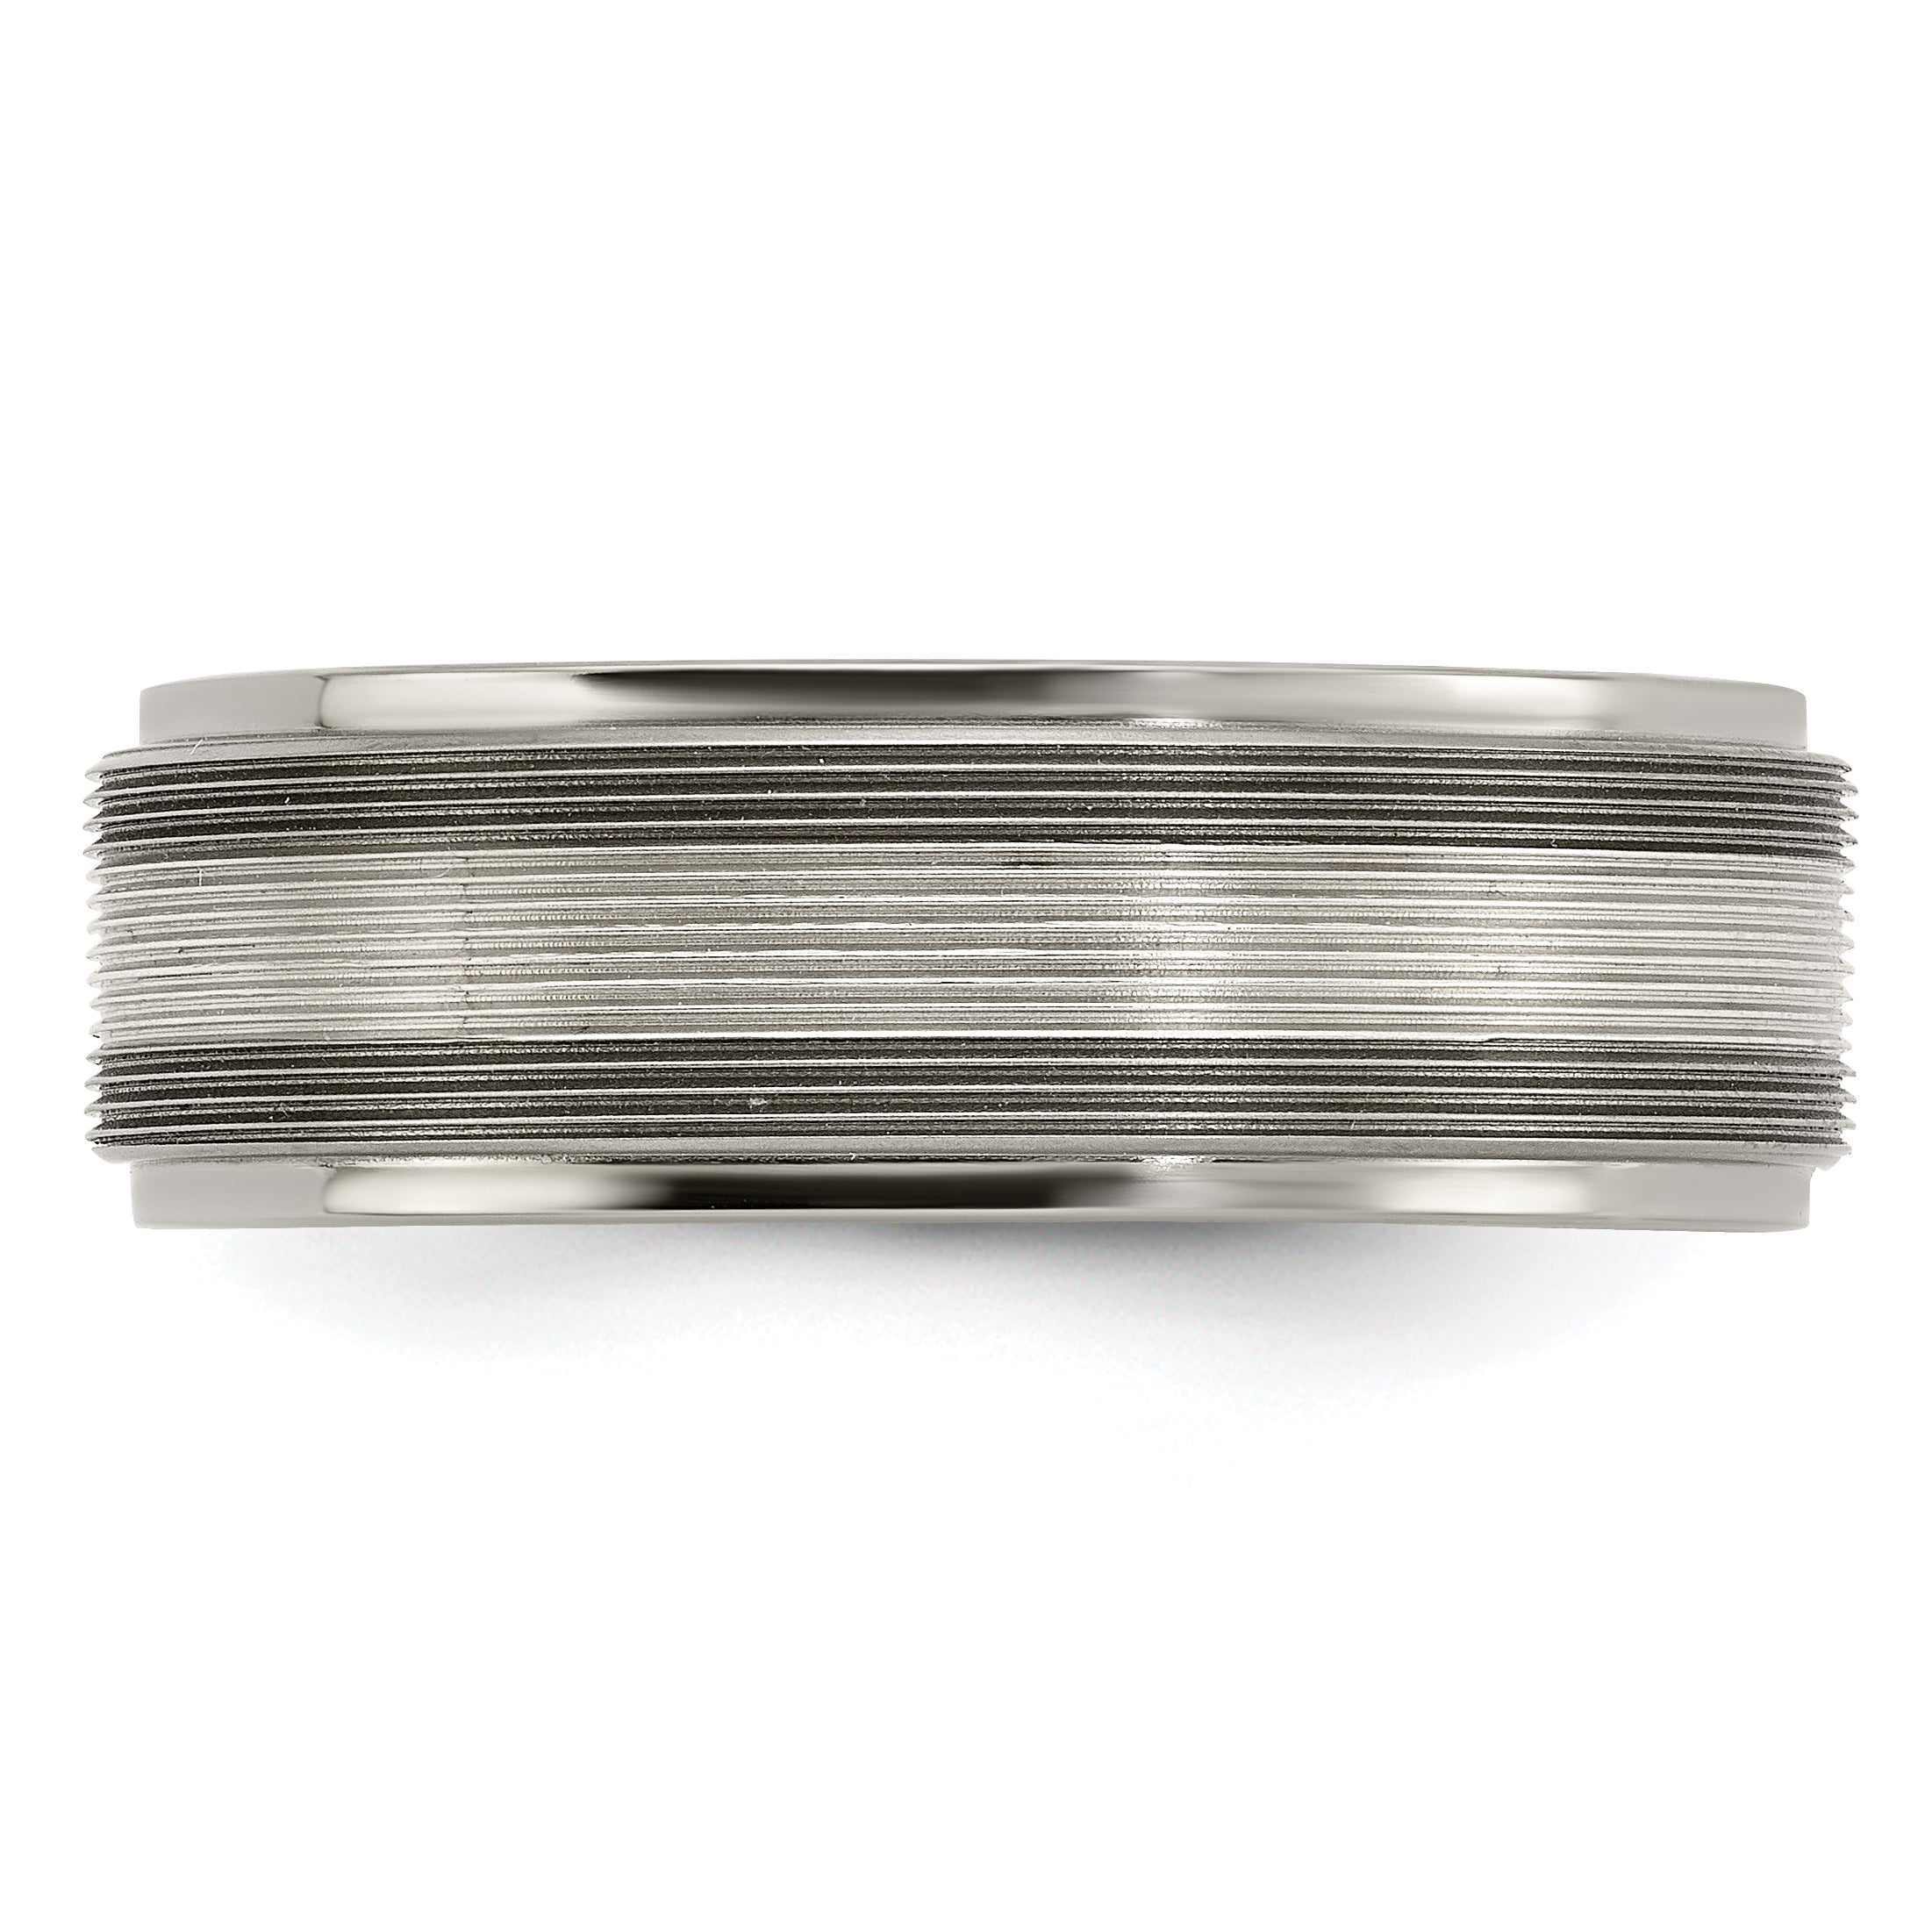 Edward Mirell Titanium with Sterling Silver Textured Lines Step Edge 7.5mm Band